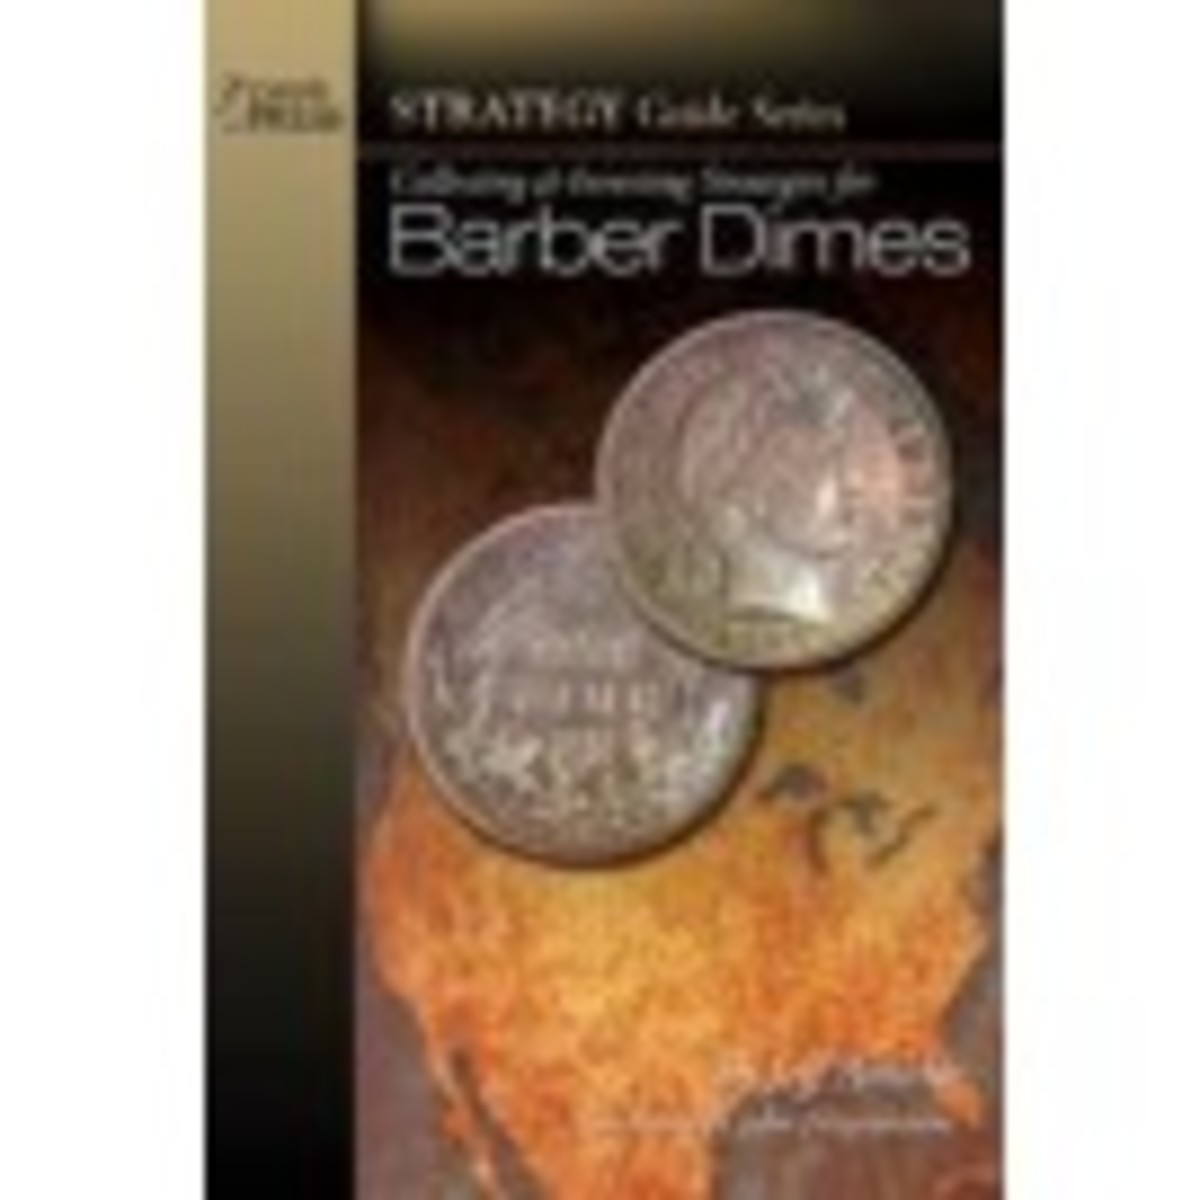 Collecting & Investing Strategies for Barber Dimes